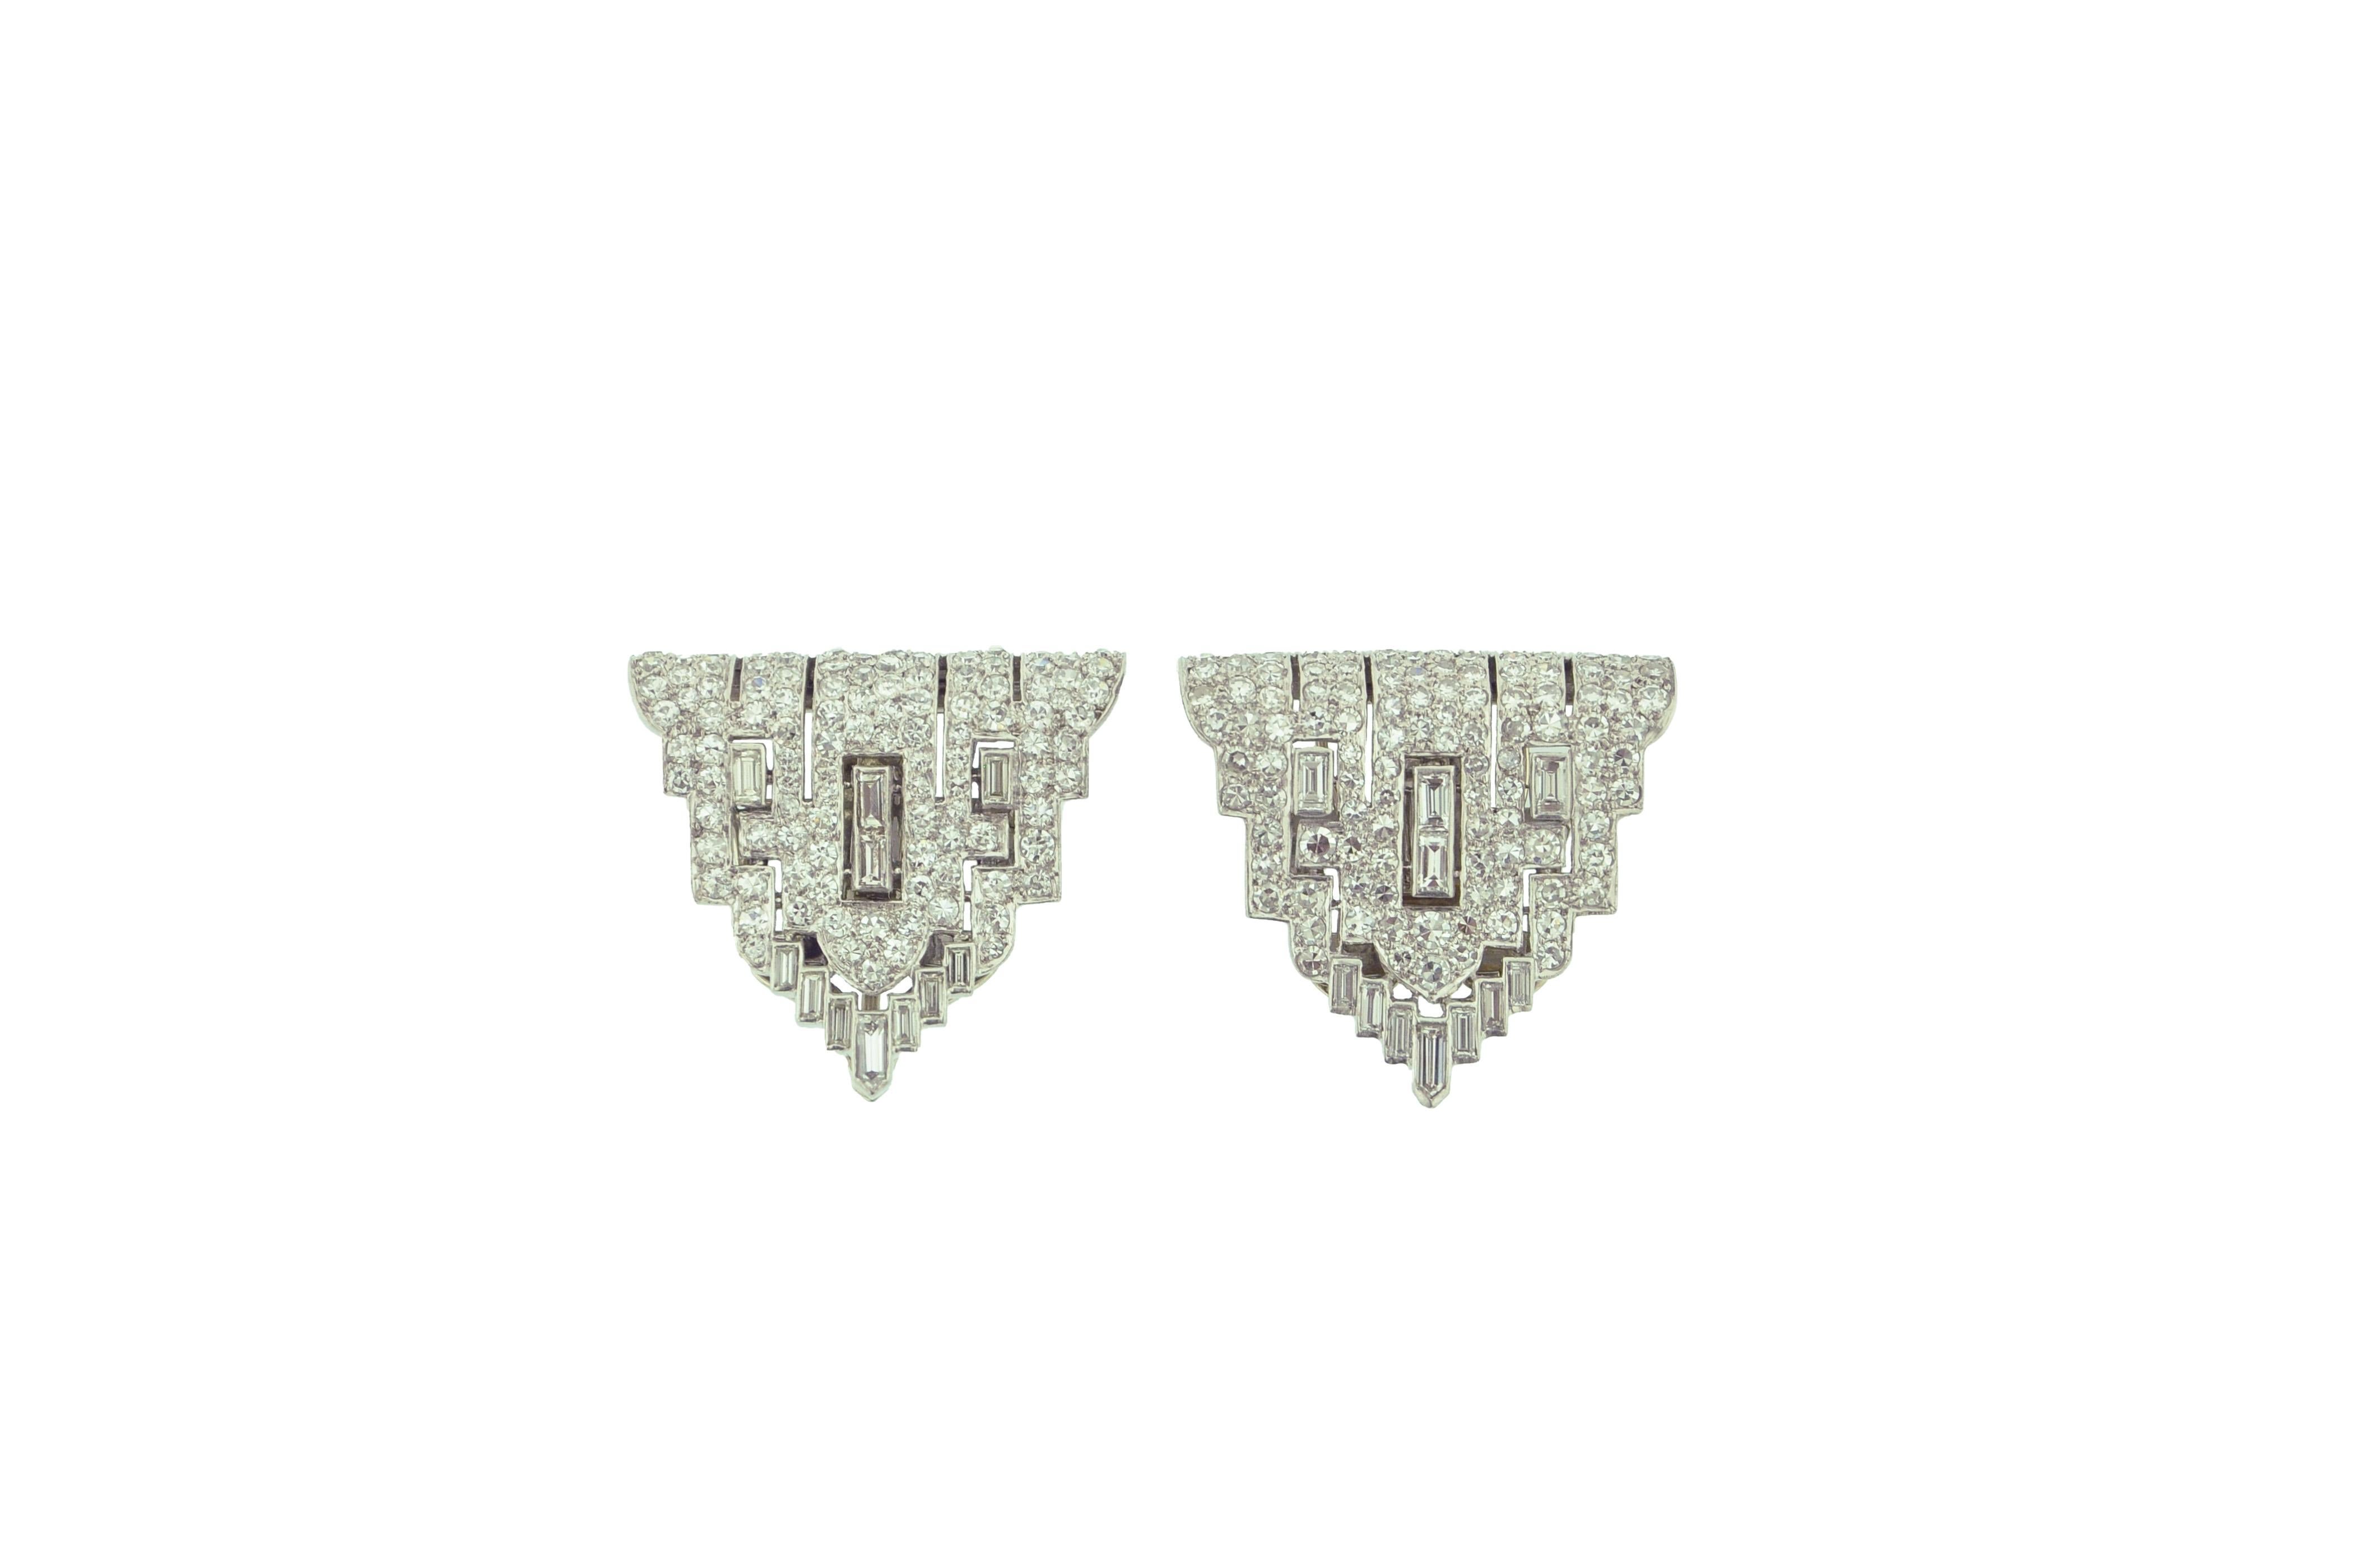 These beautiful clips are very versatile as they can be used as either clips or converted into a brooch. This Art Deco piece was crafted with Platinum and 14 Karat White Gold. With a mix of baguette and round diamonds, there's a total of 220